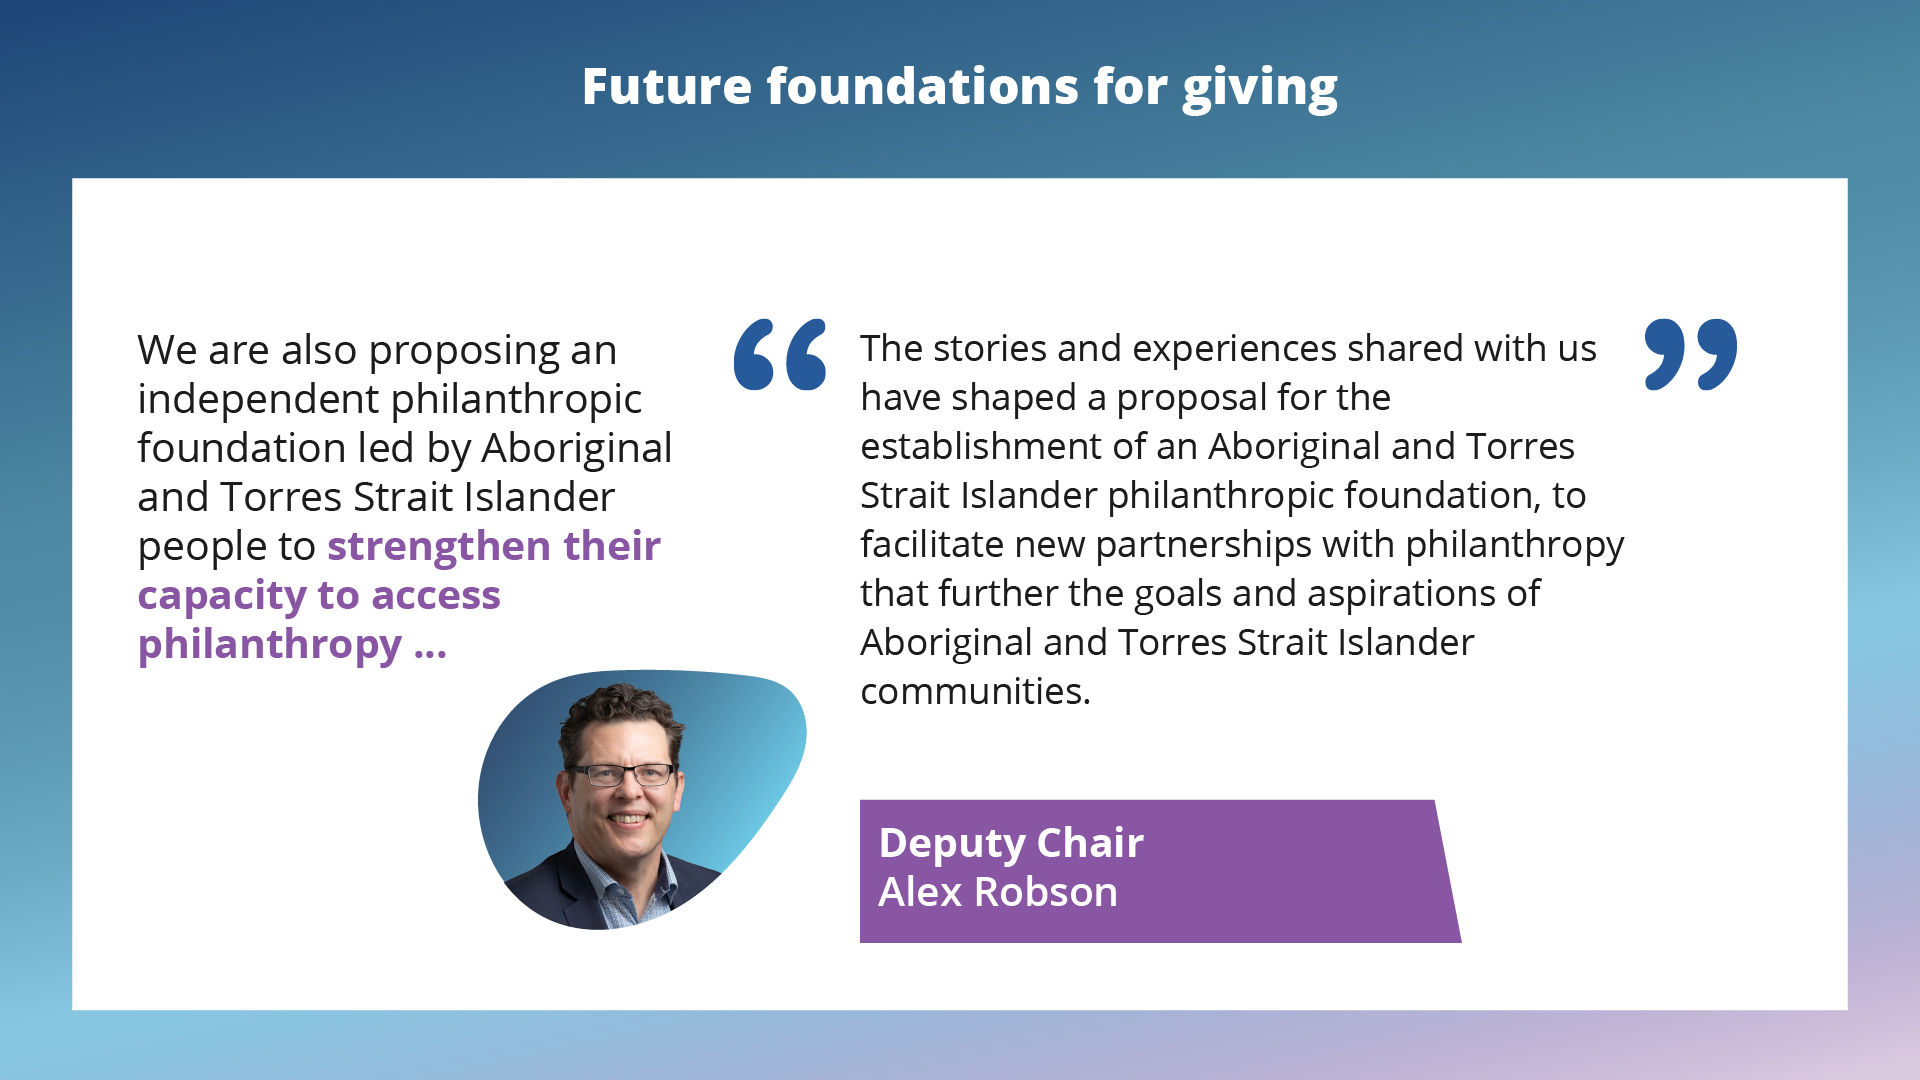 Improve public information on charities and giving. The stories and experiences shared with us have shaped a proposal for the establishment of an Aboriginal and Torres Strait Islander philanthropic foundation, to facilitate new partnerships with philanthropy that further the goals and aspirations of Aboriginal and Torres Strait Islander communities. Deputy Chair Alex Robson.